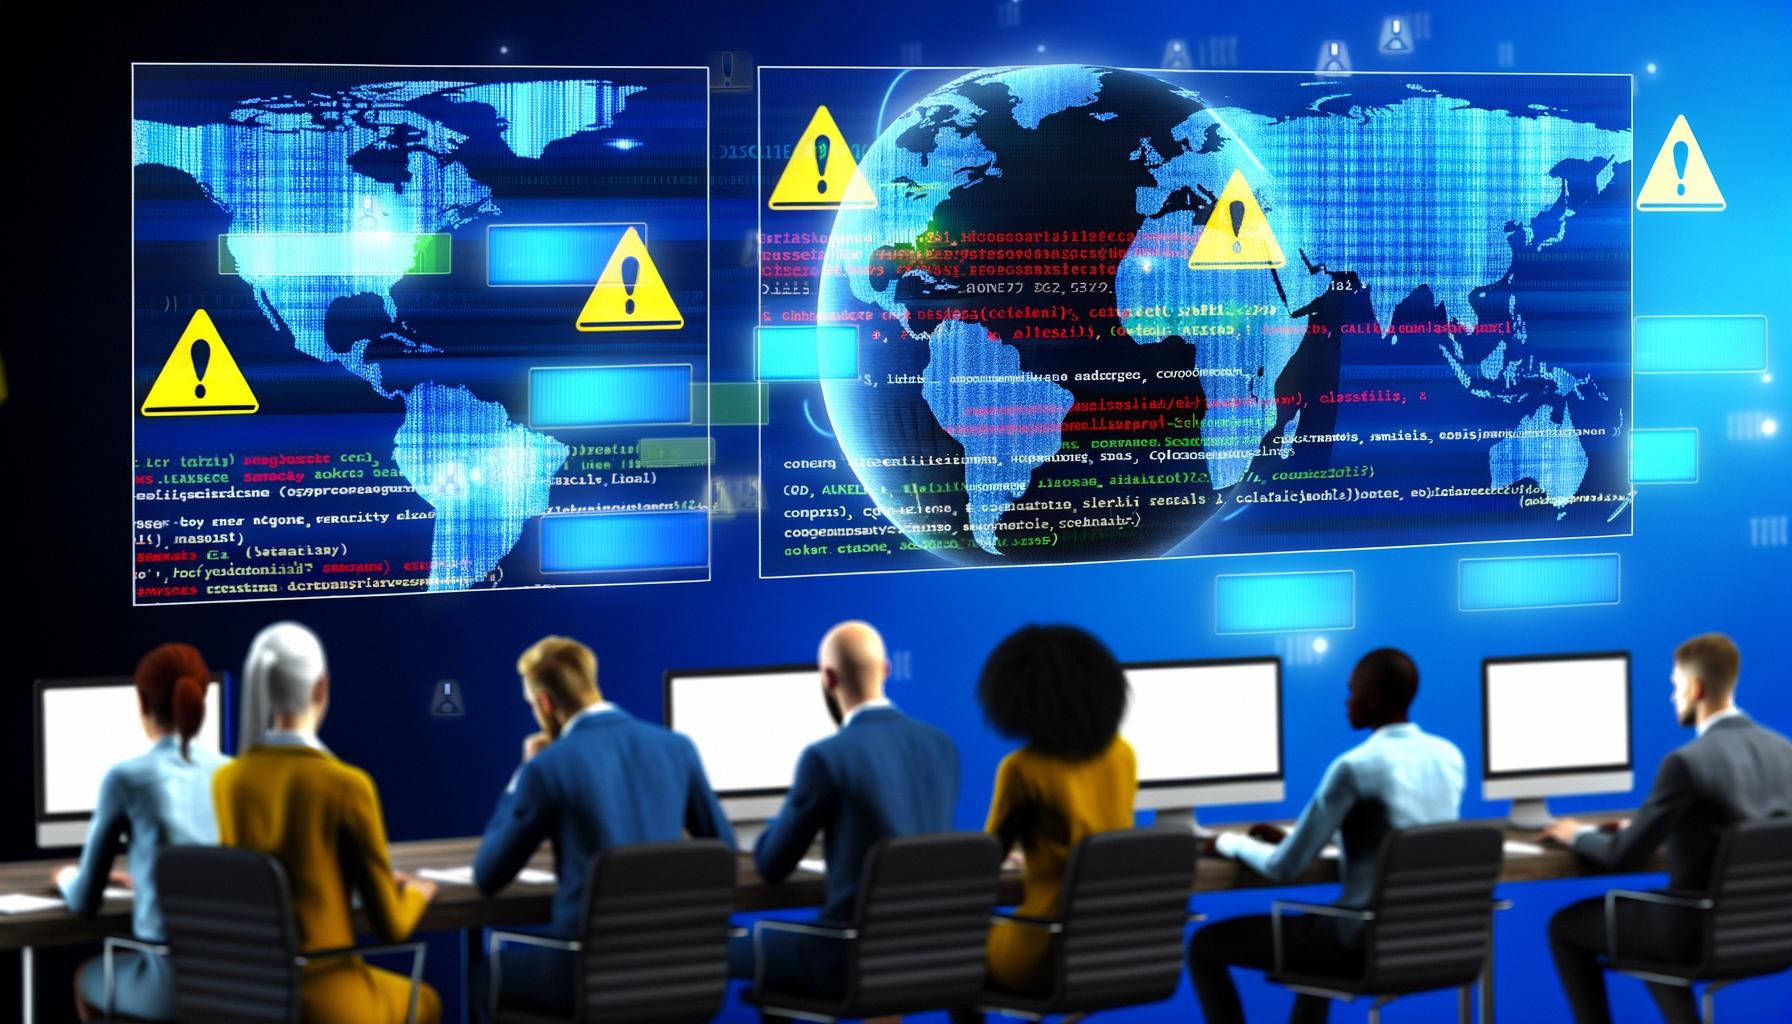 Escalating cybersecurity threats necessitate stronger global defenses.